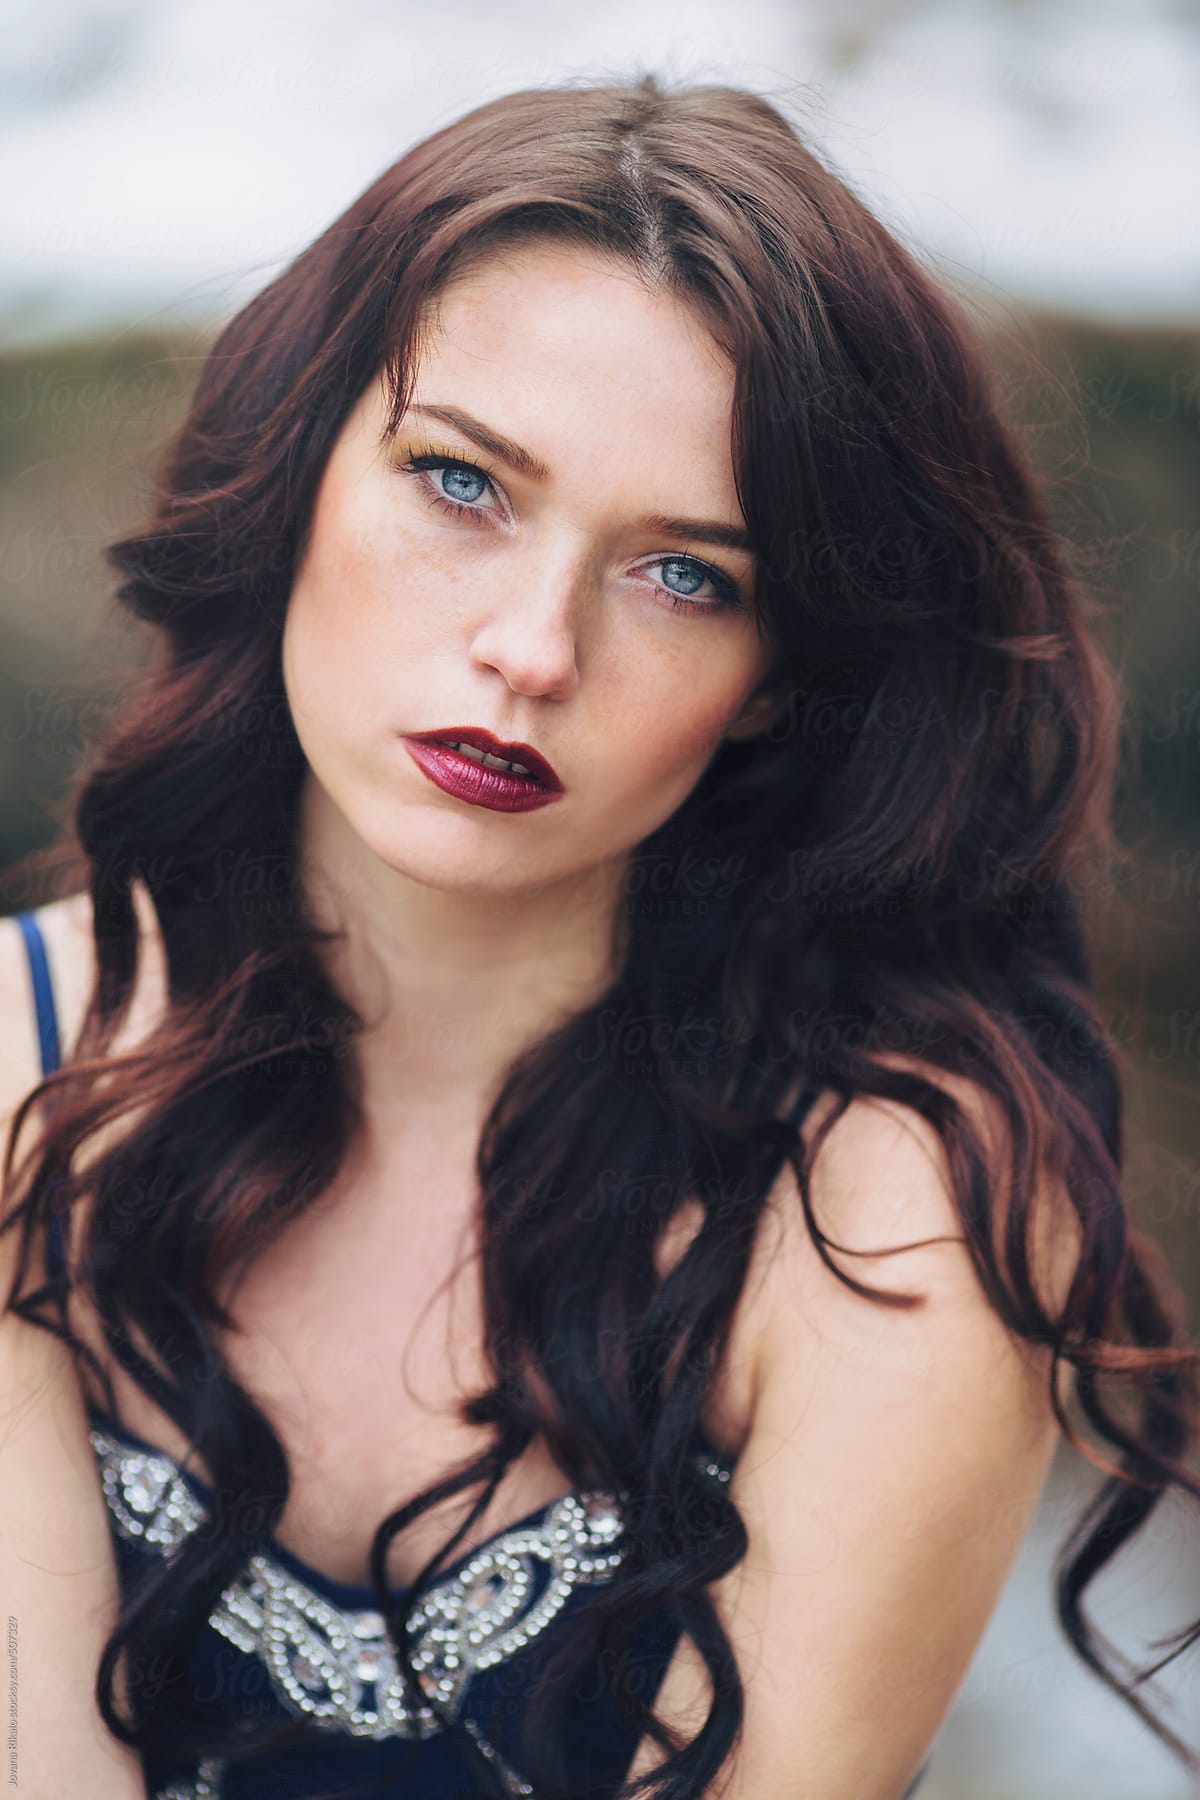 Portrait Of A Beautiful Woman With Blue Eyes And Freckles Porjovana Rikalo